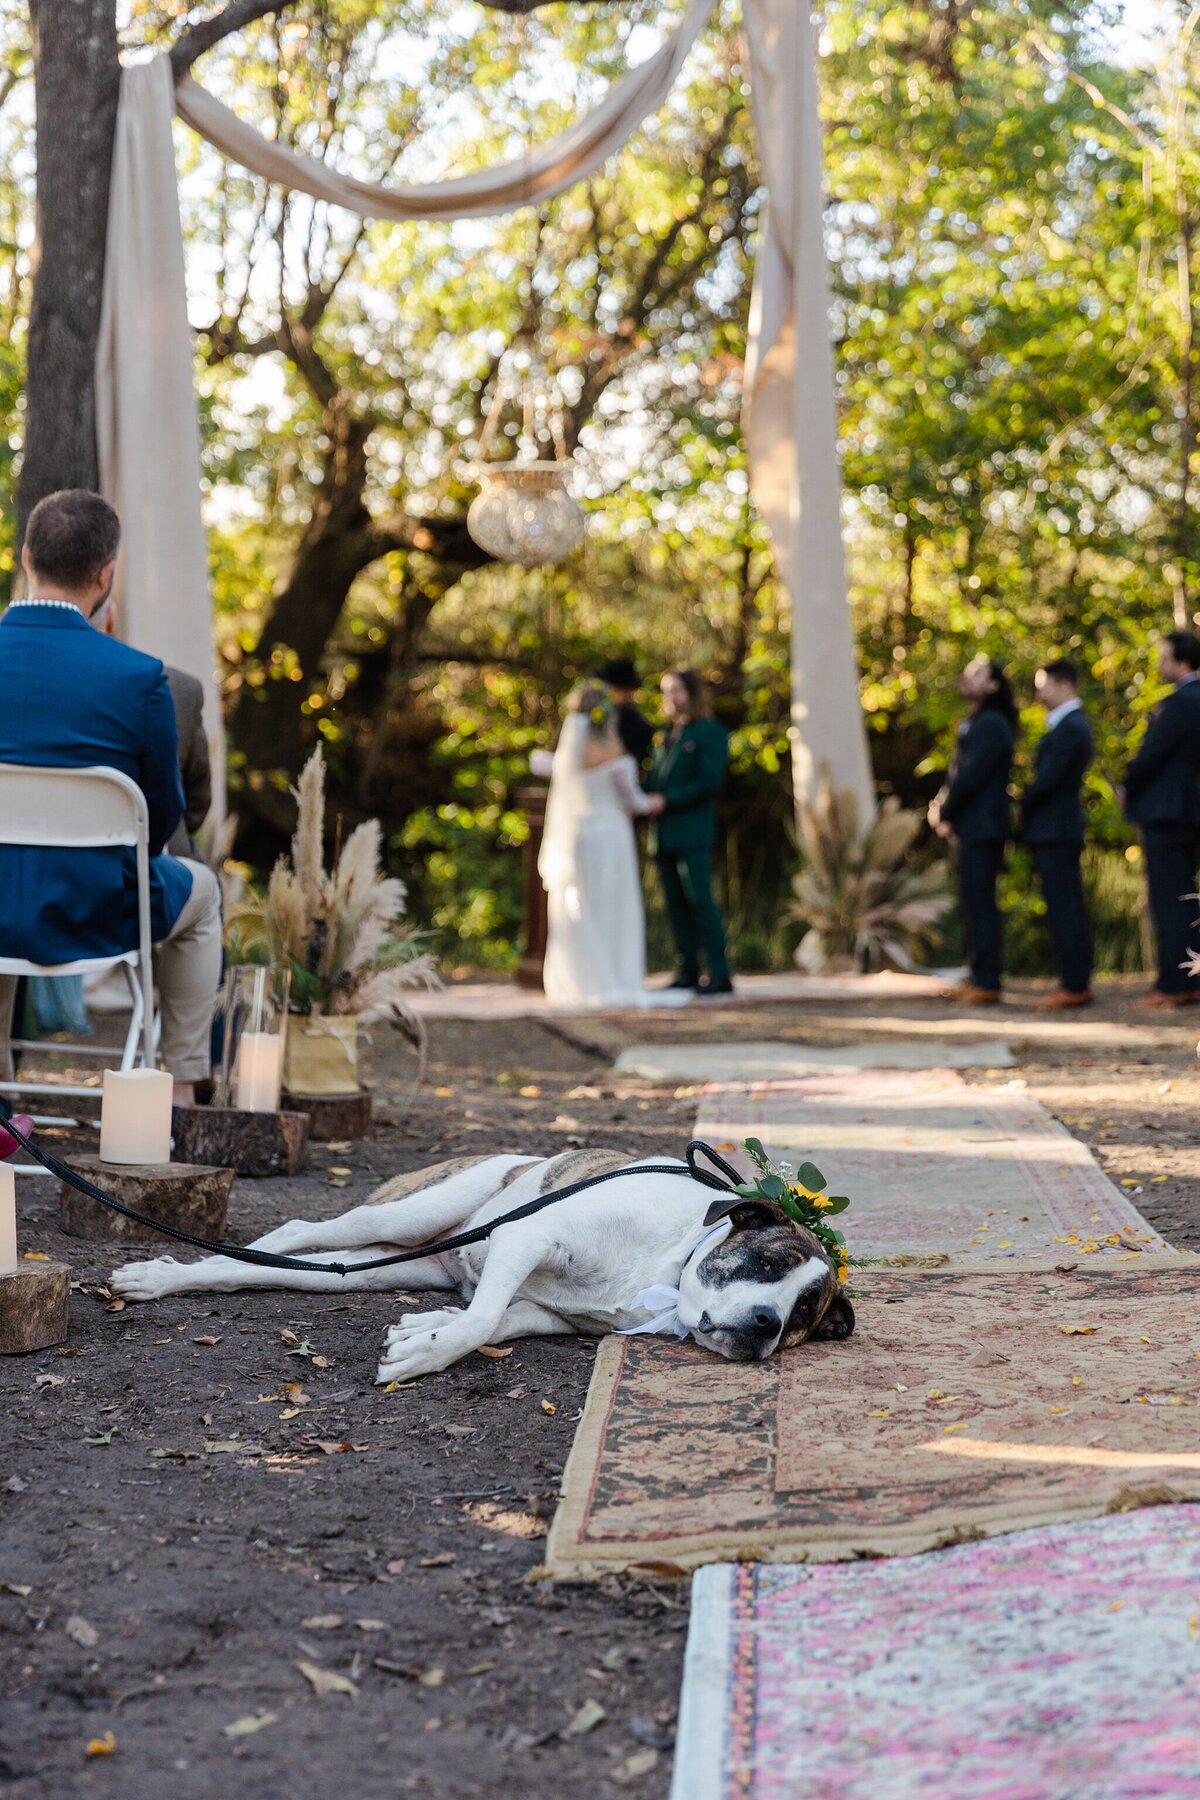 A candid shot of the ring bearer dog resting on a rug during an outdoor, natural wedding ceremony in Fort Worth, Texas. The white and brown dog is wearing a small floral arrangement on their collar. In the background, the bride and groom can be seen out of focus preparing to be wed.